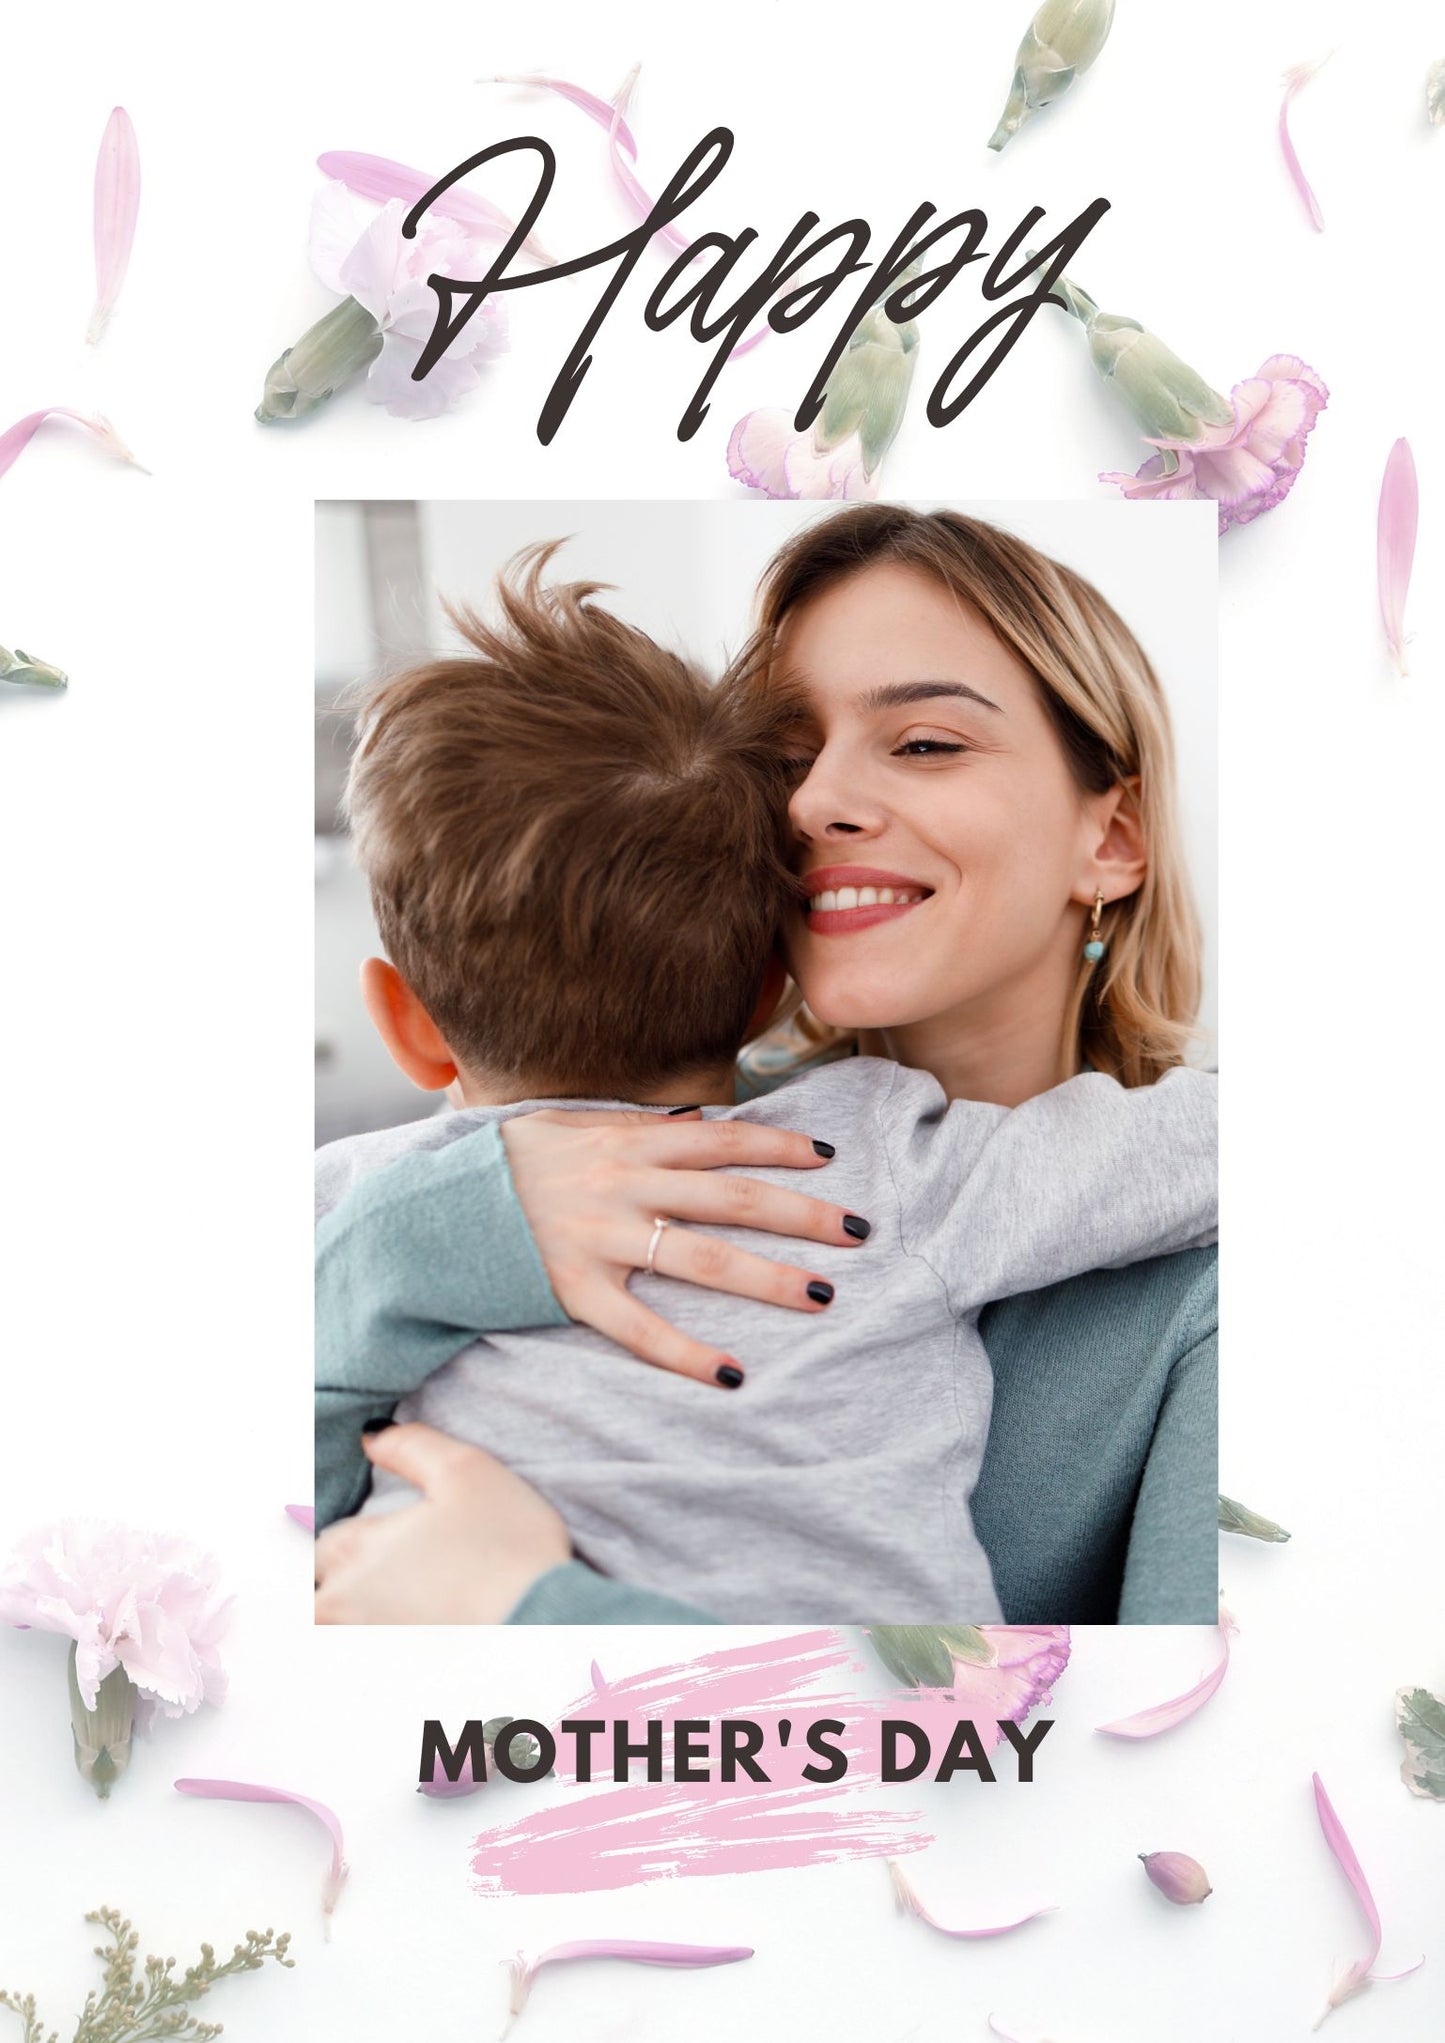 Carnation Mother's Day Photo Card